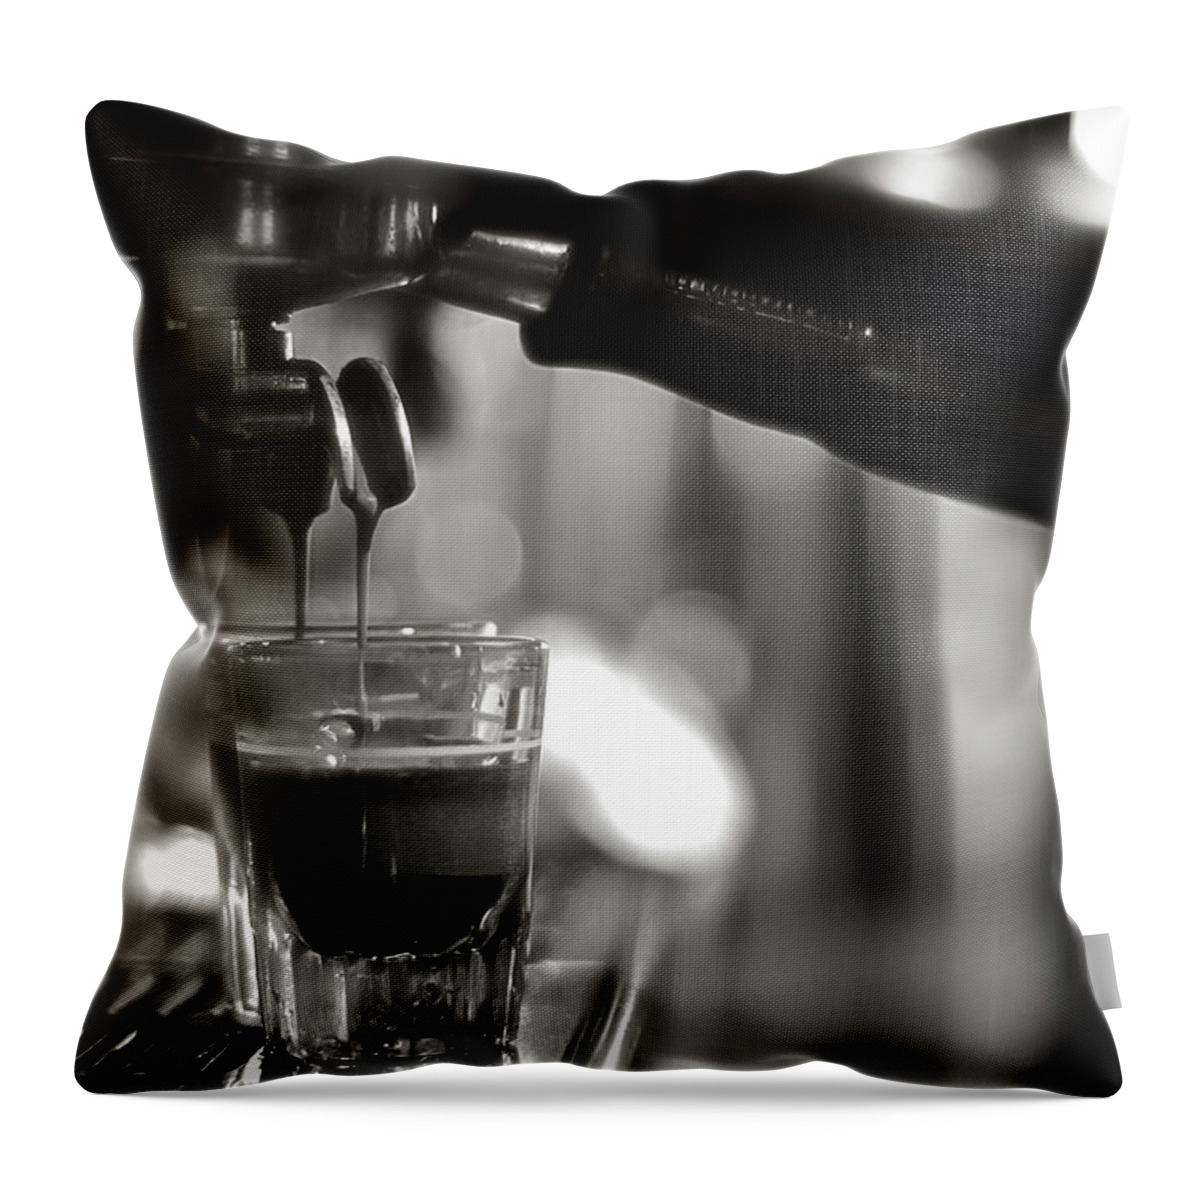 Coffee Maker Throw Pillow featuring the photograph Coffee In Glass by Jrj-photo